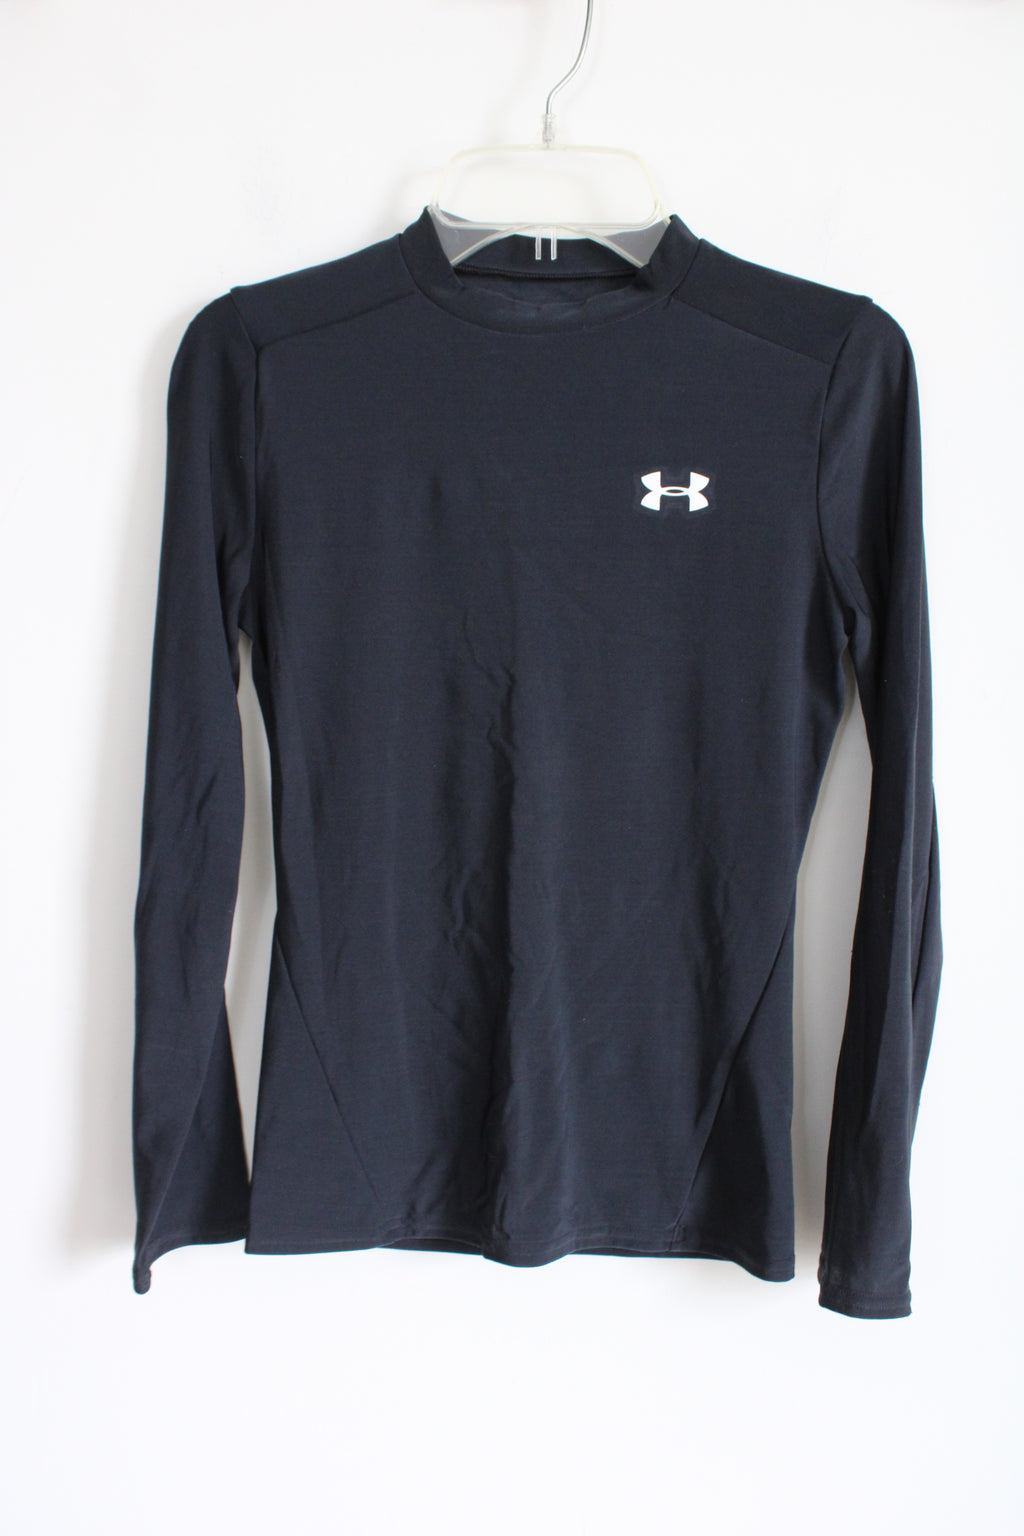 Under Armour Fitted HeatGear Black Top | Youth M (10/12)